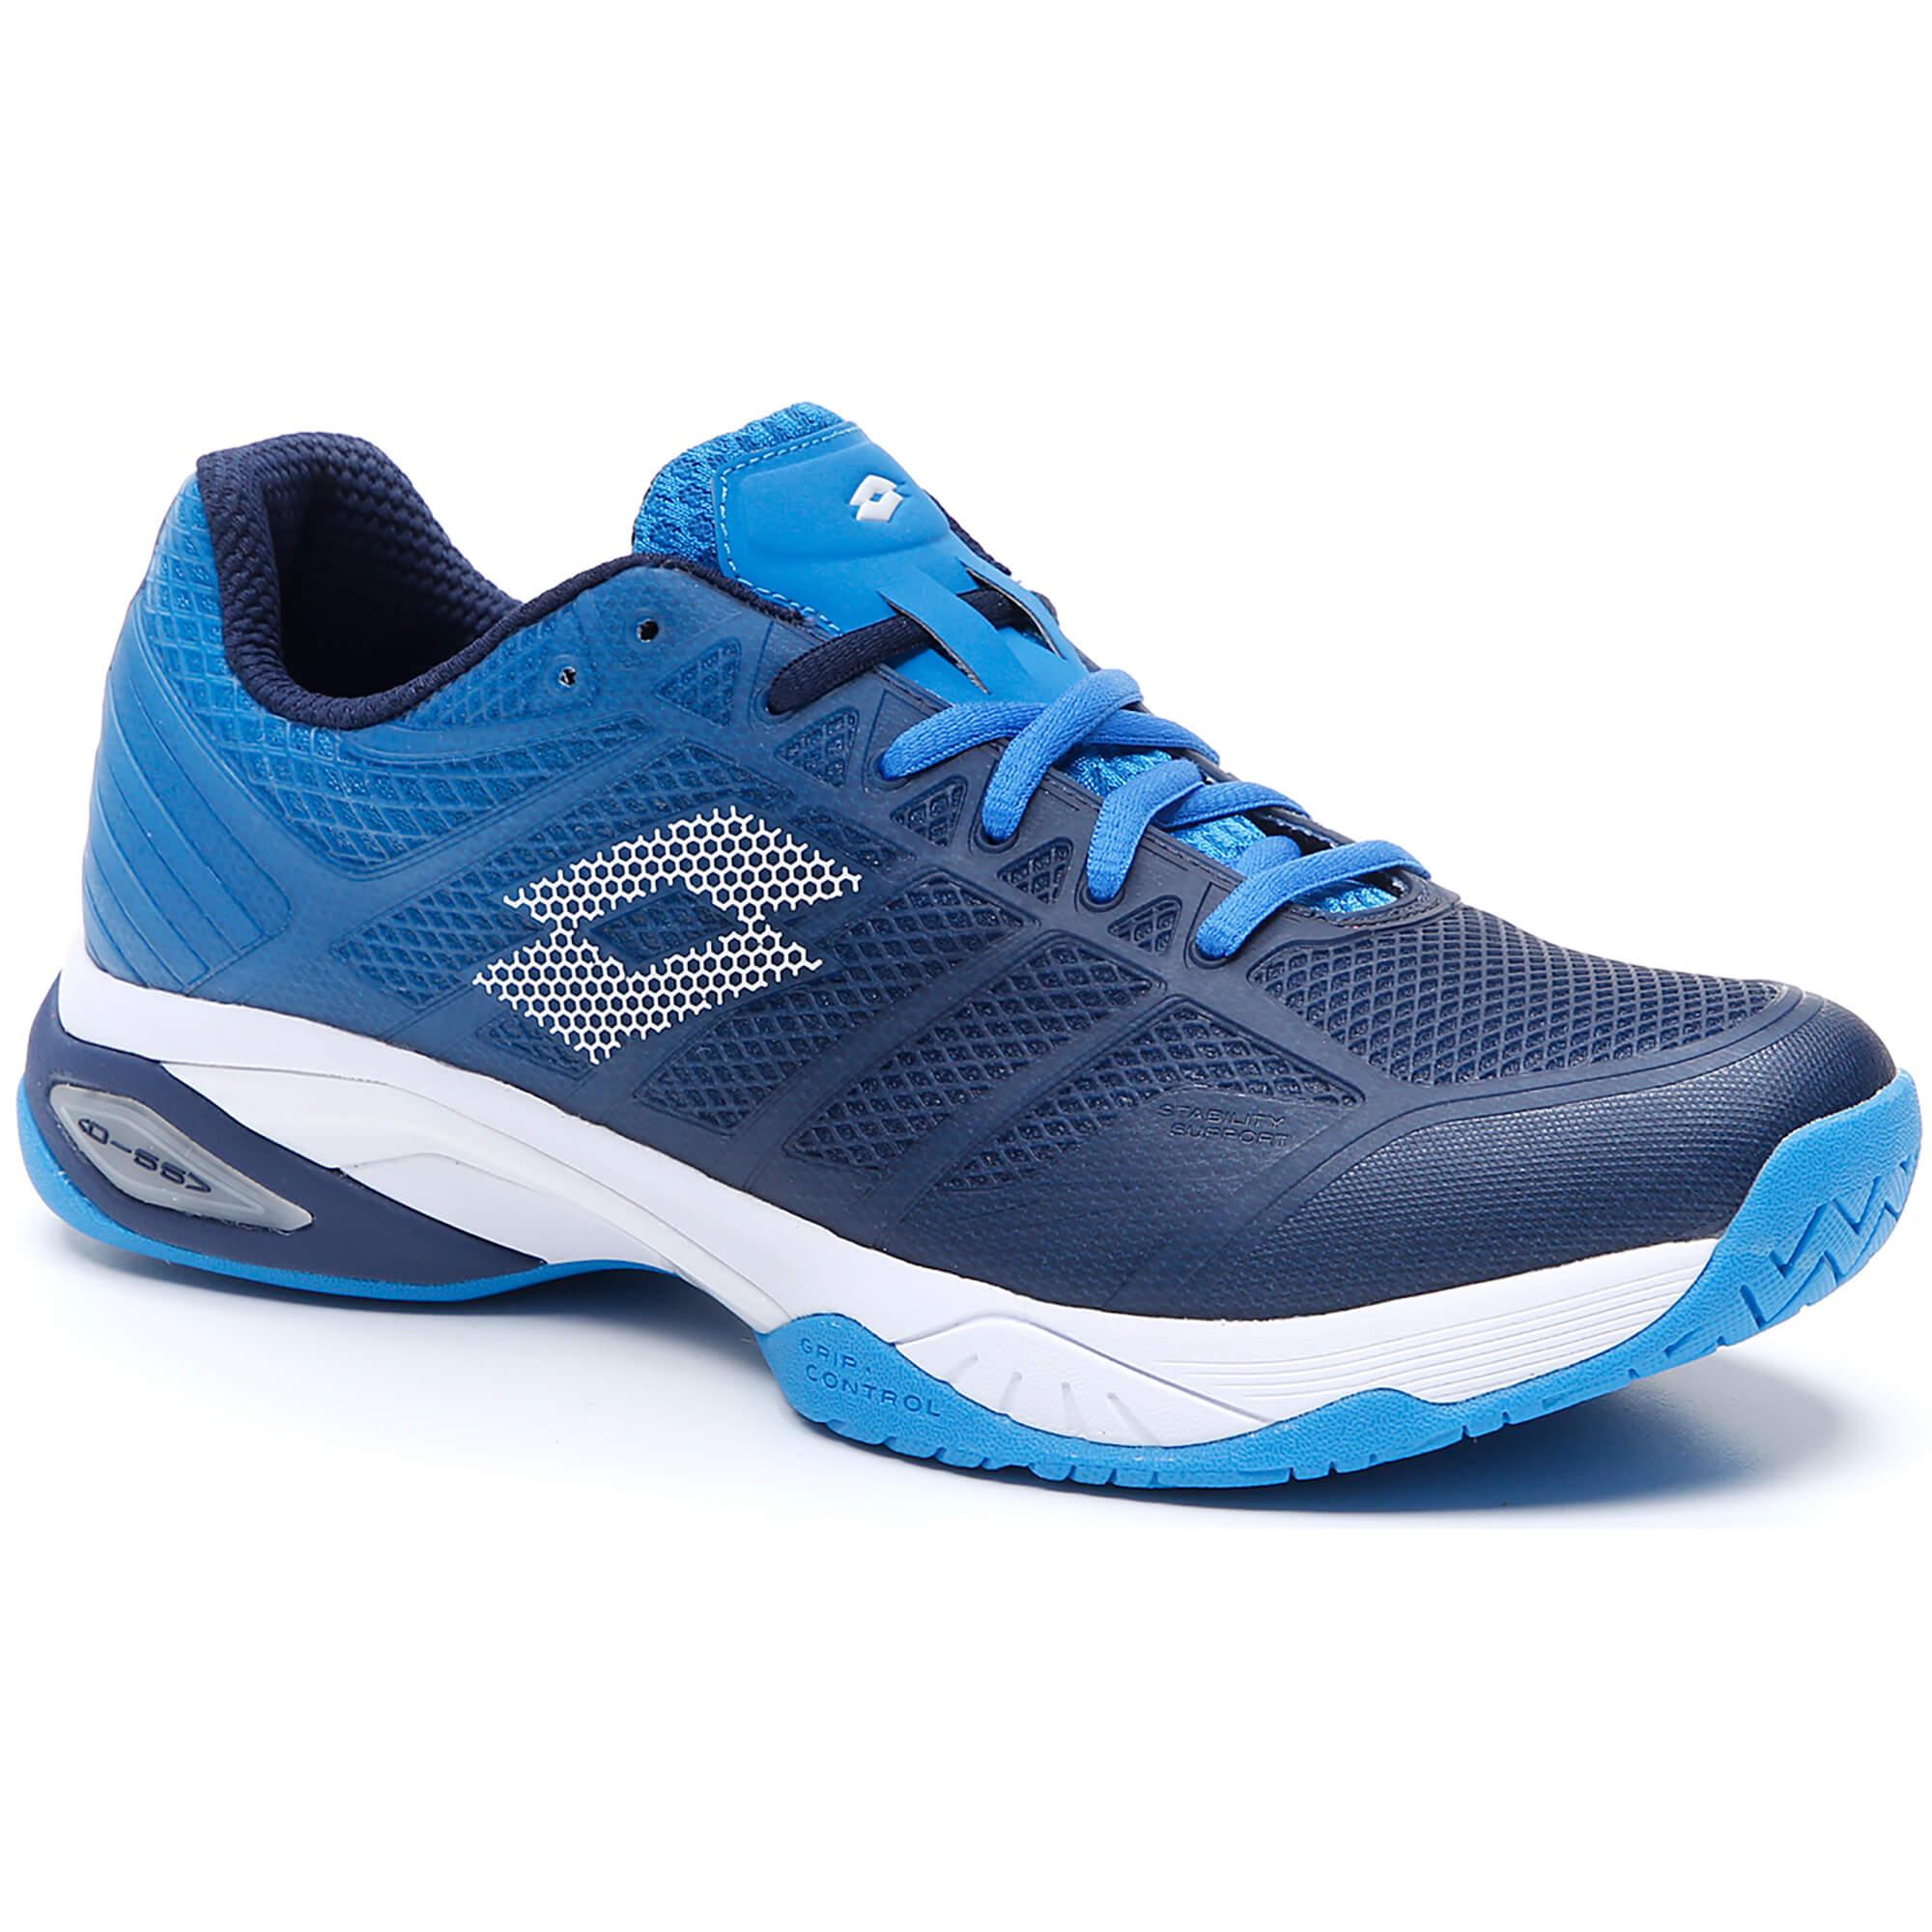 Lotto Mens Mirage 300 Tennis Shoes - Navy Blue/All White ...